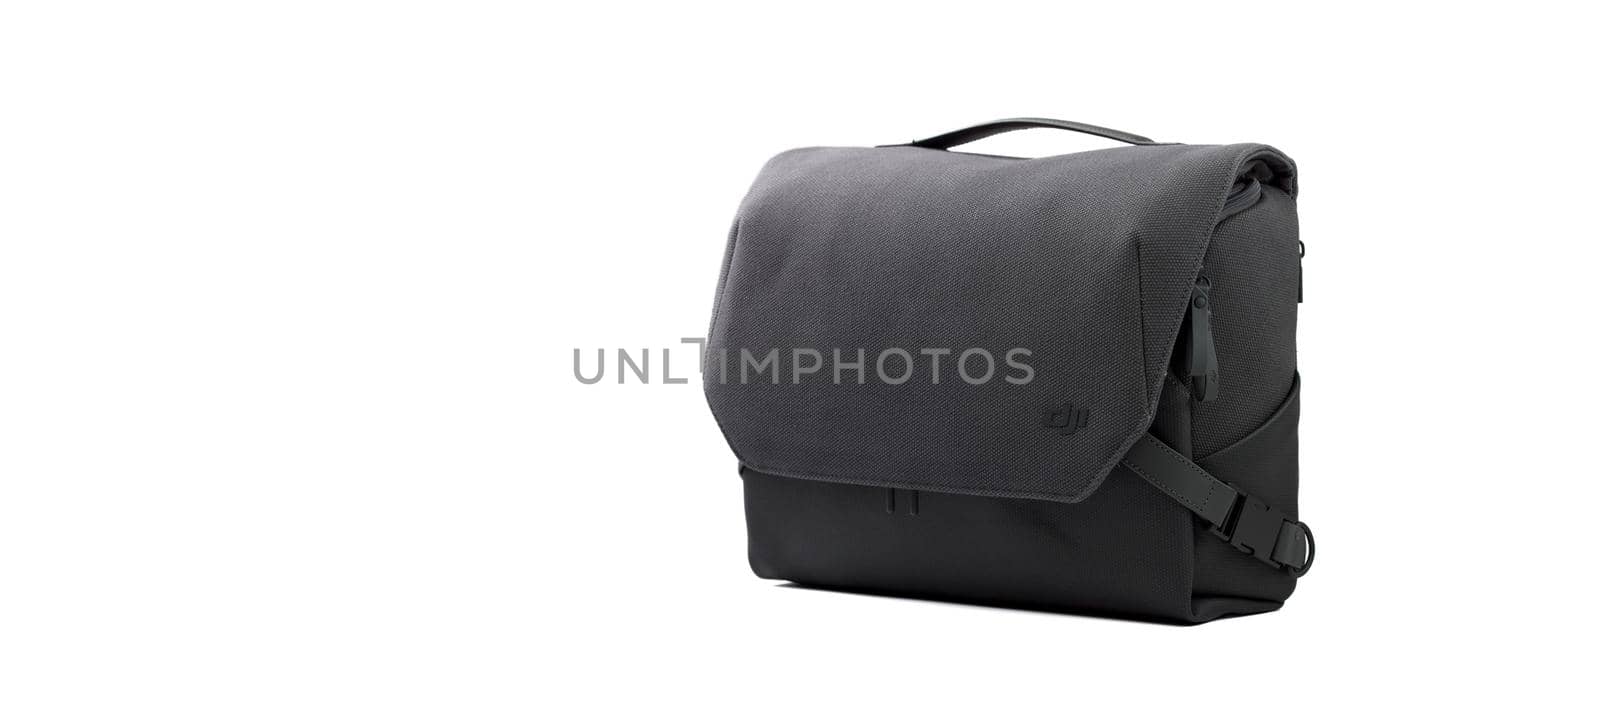 Drone bag isolated on white. Accessory for carrying and storing the quadcopter.